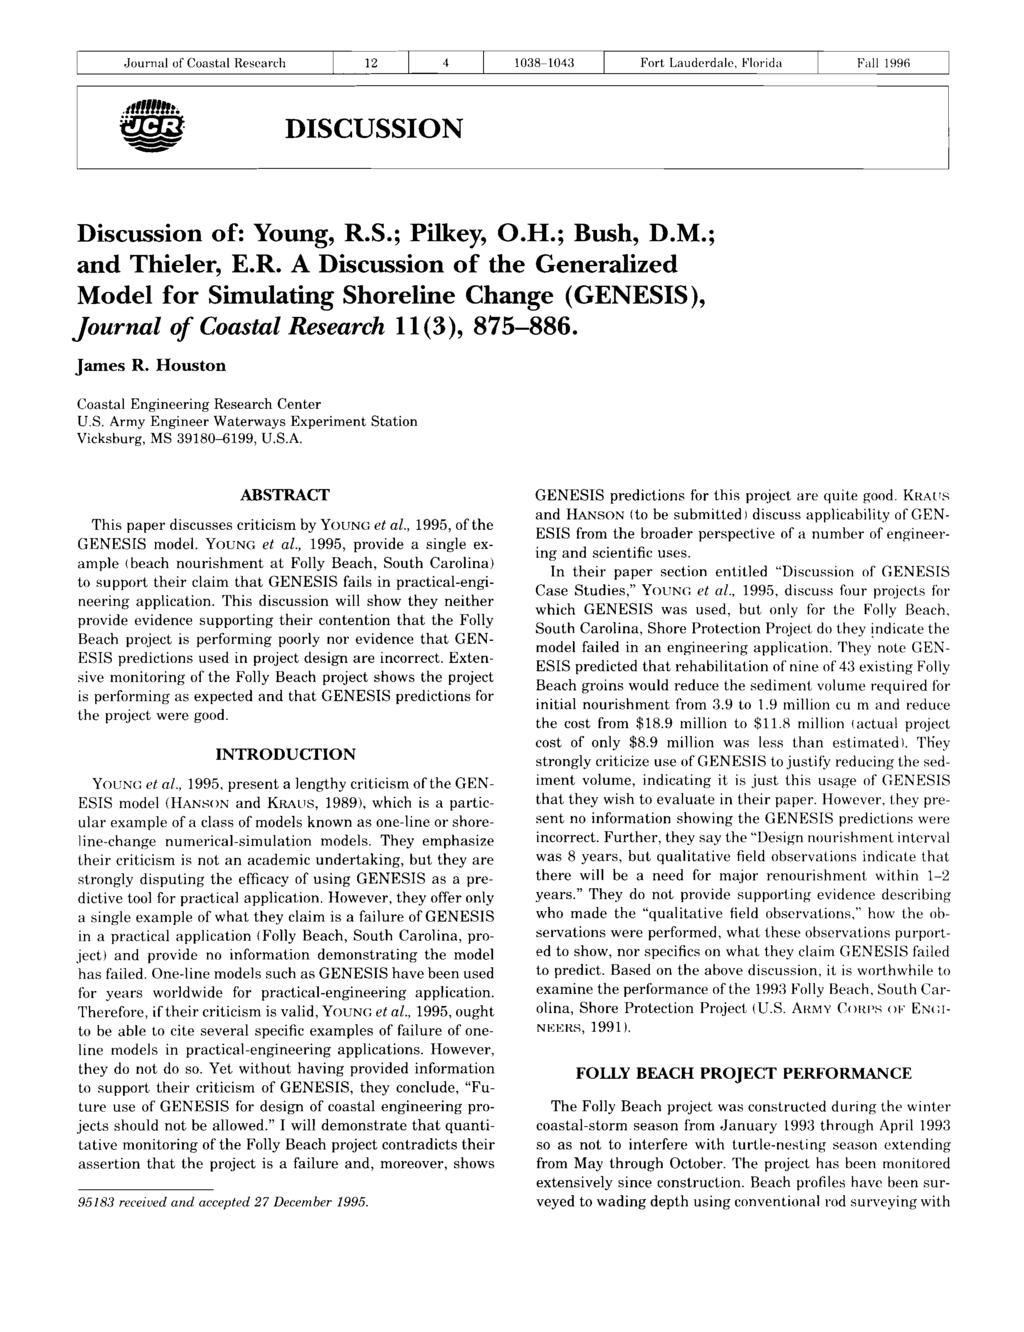 Journal of Coastal Research 1038-1043 Fort Lauderdale, Florida Fall 1996.tfl''''II:. ~ DISCUSSION Discussion of: Young, R.S.; Pilkey, D.H.; Bush, D.M.; and Thieler, E.R. A Discussion of the Generalized Model for Simulating Shoreline Change (GENESIS), Journal of Coastal Research 11(3), 875-886.